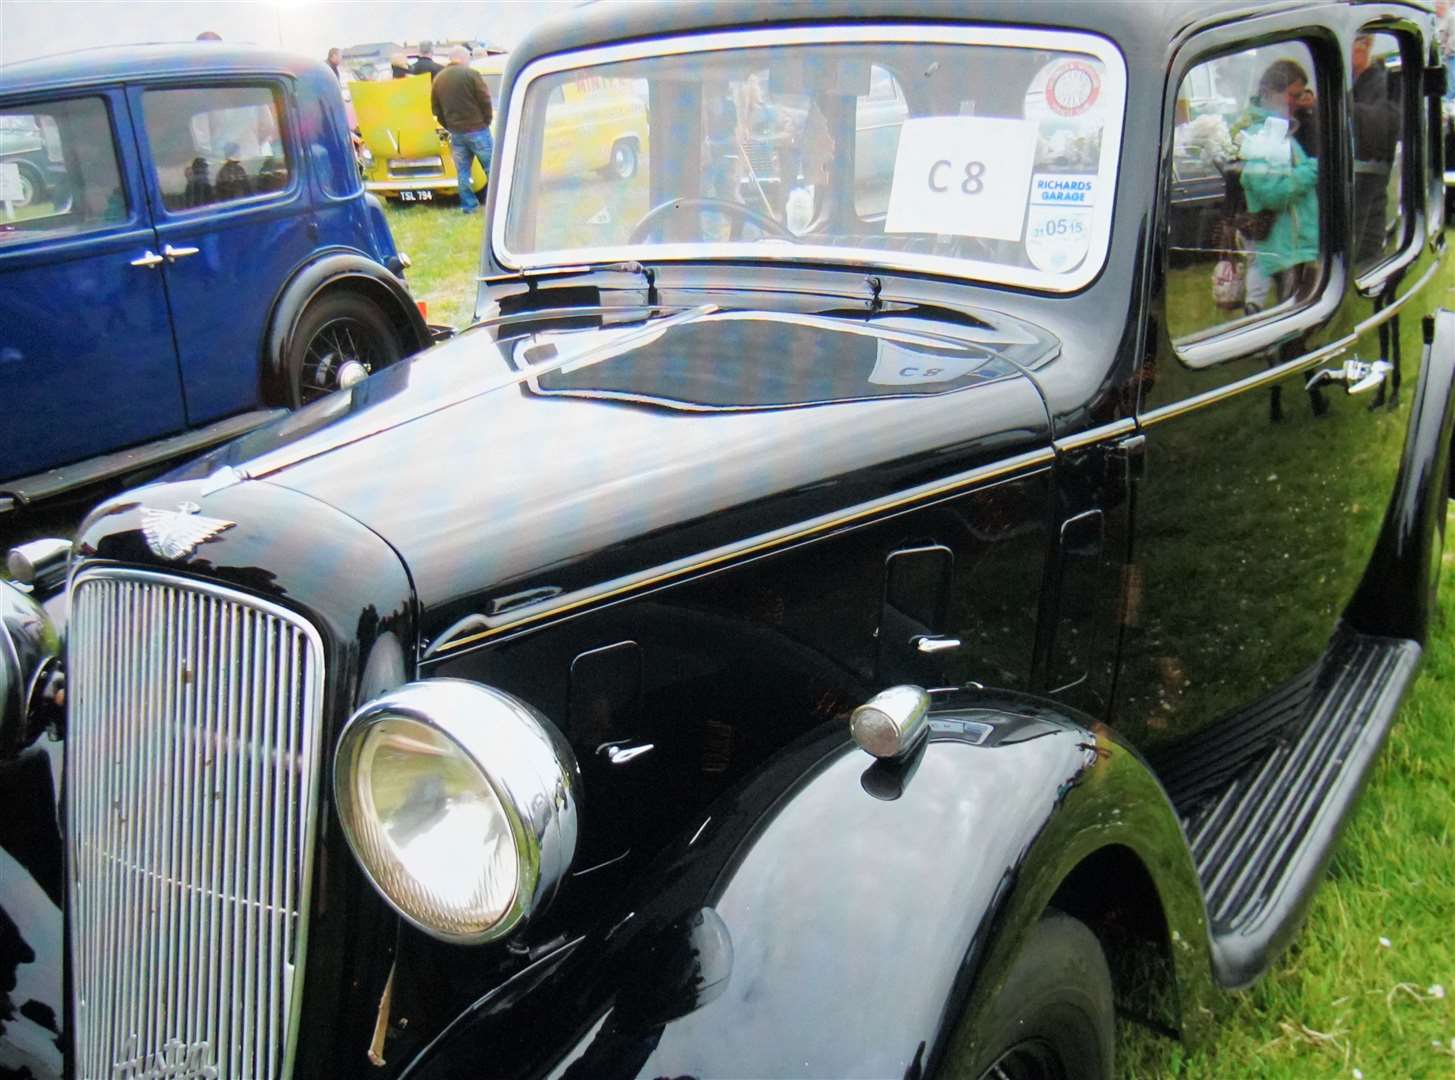 A 1936 Austin 10 Cambridge on show at John O'Groats and owned by the treasurer of the vintage vehicle club, David Green.